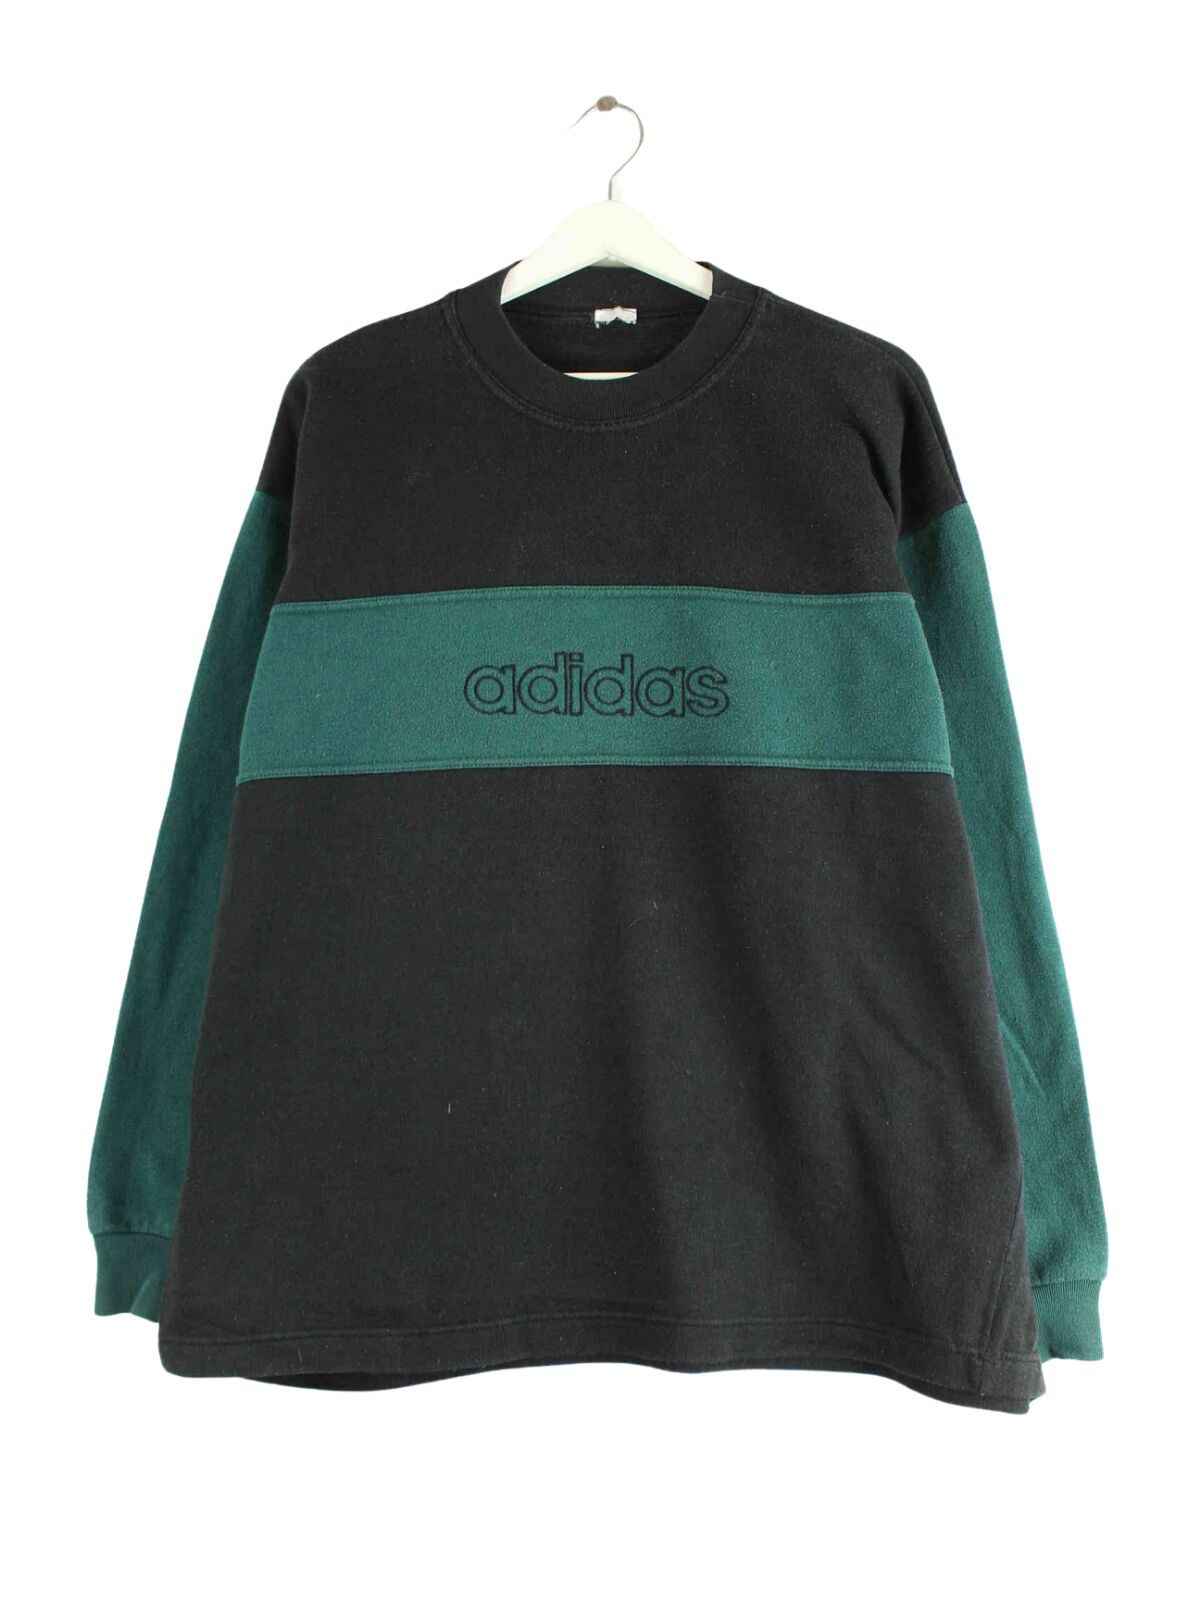 Adidas 90s Vintage Spellout Embroidered Sweater Schwarz M (front image)